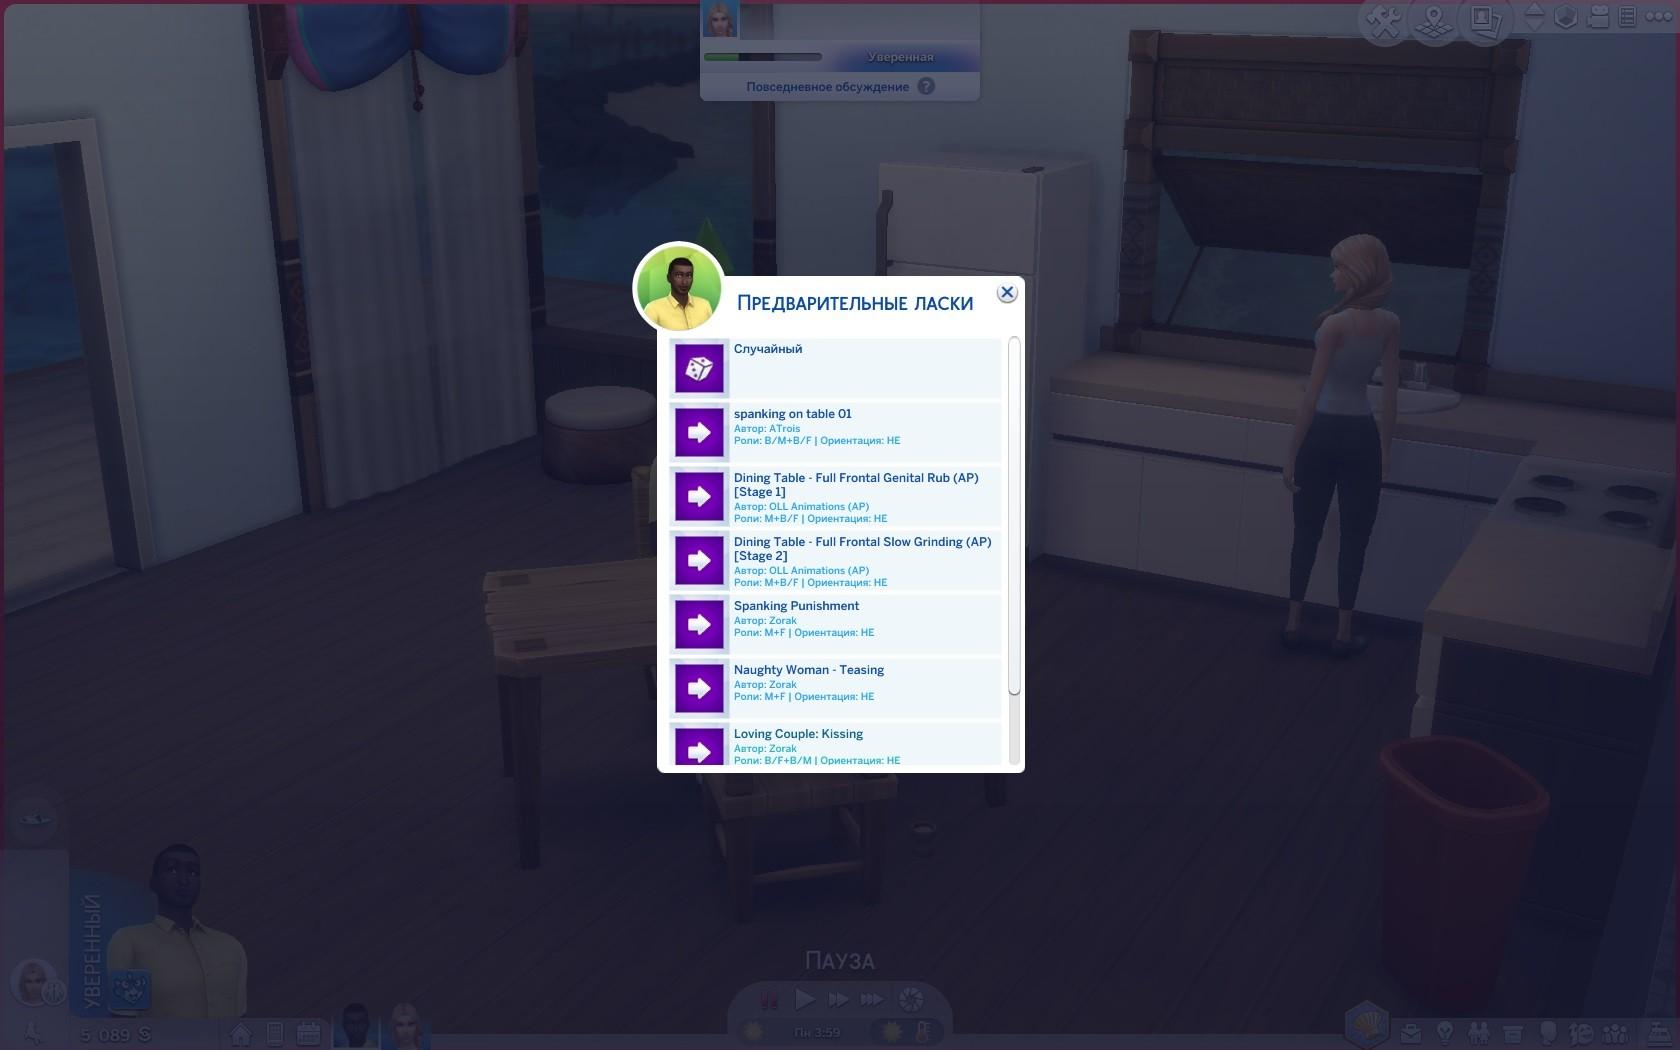 Симс 4 викед вимс русификатор 2024. SIMS 4 wickedwhims. Wicked whims SIMS 4 симс 4. Мод на симс Wicked whims. SIMS 4 мод wickedwhims.